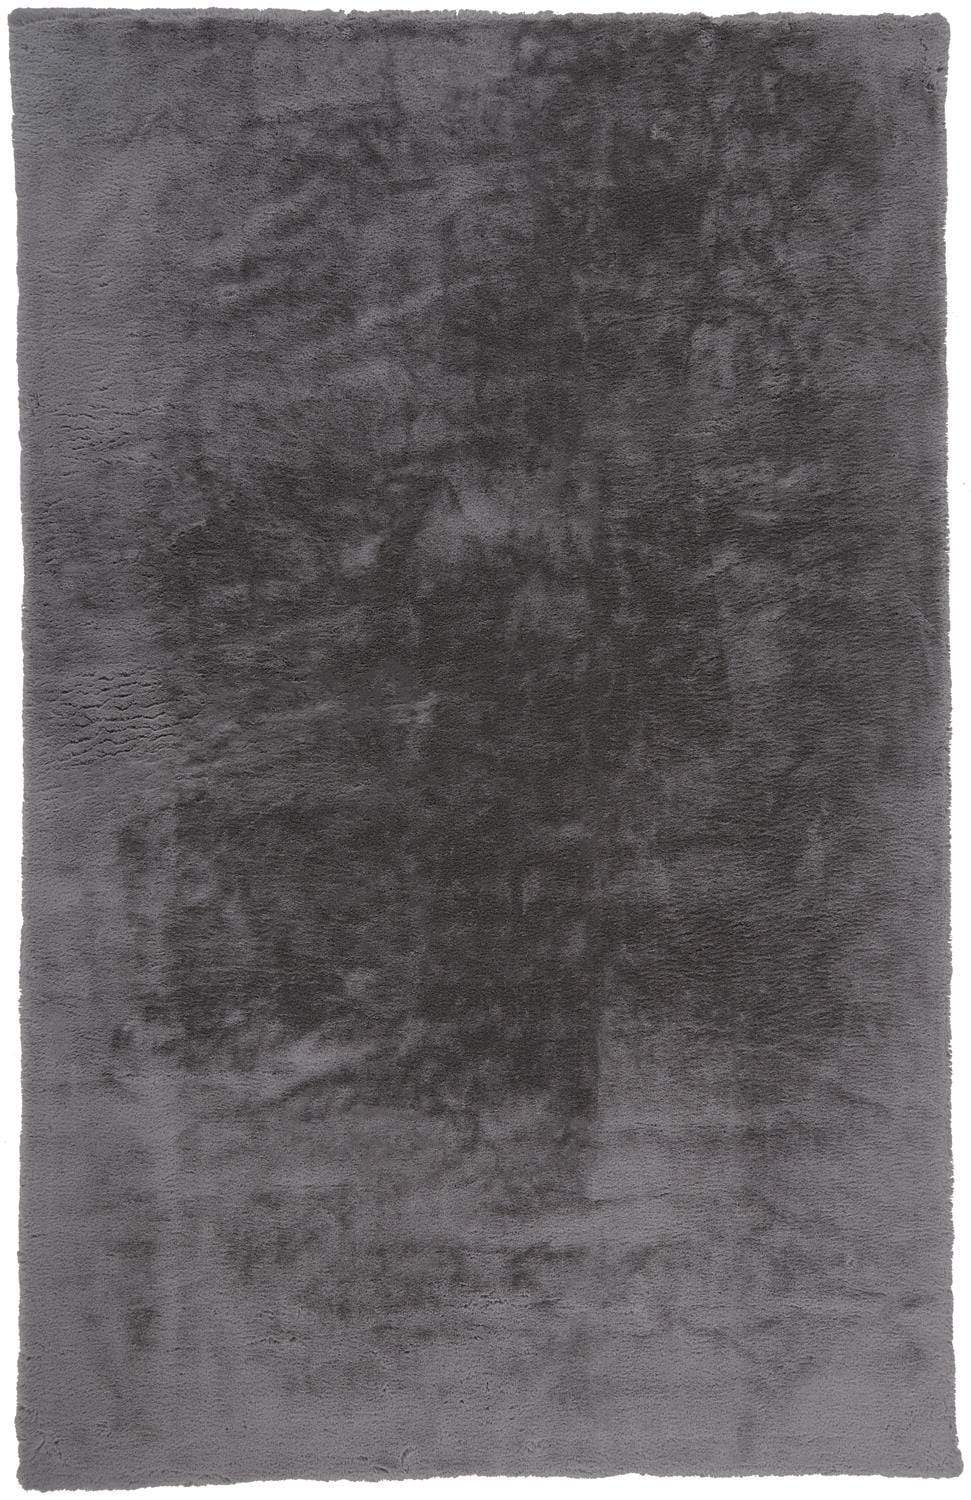 Feizy Feizy Luxe Velour Glamorous Ultra-Soft Shag Rug - Warm Dark Gray - Available in 6 Sizes 4' x 6' LXV4506FLGY000C00